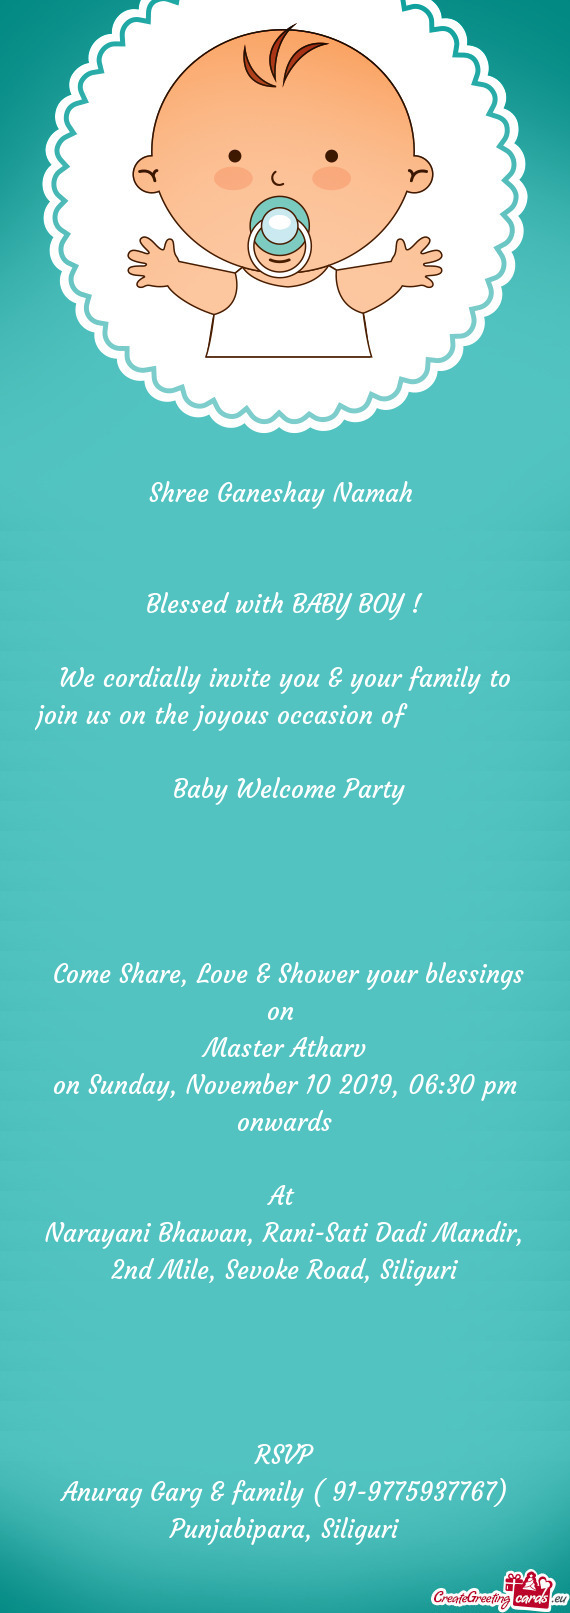 We cordially invite you & your family to join us on the joyous occasion of     Baby We